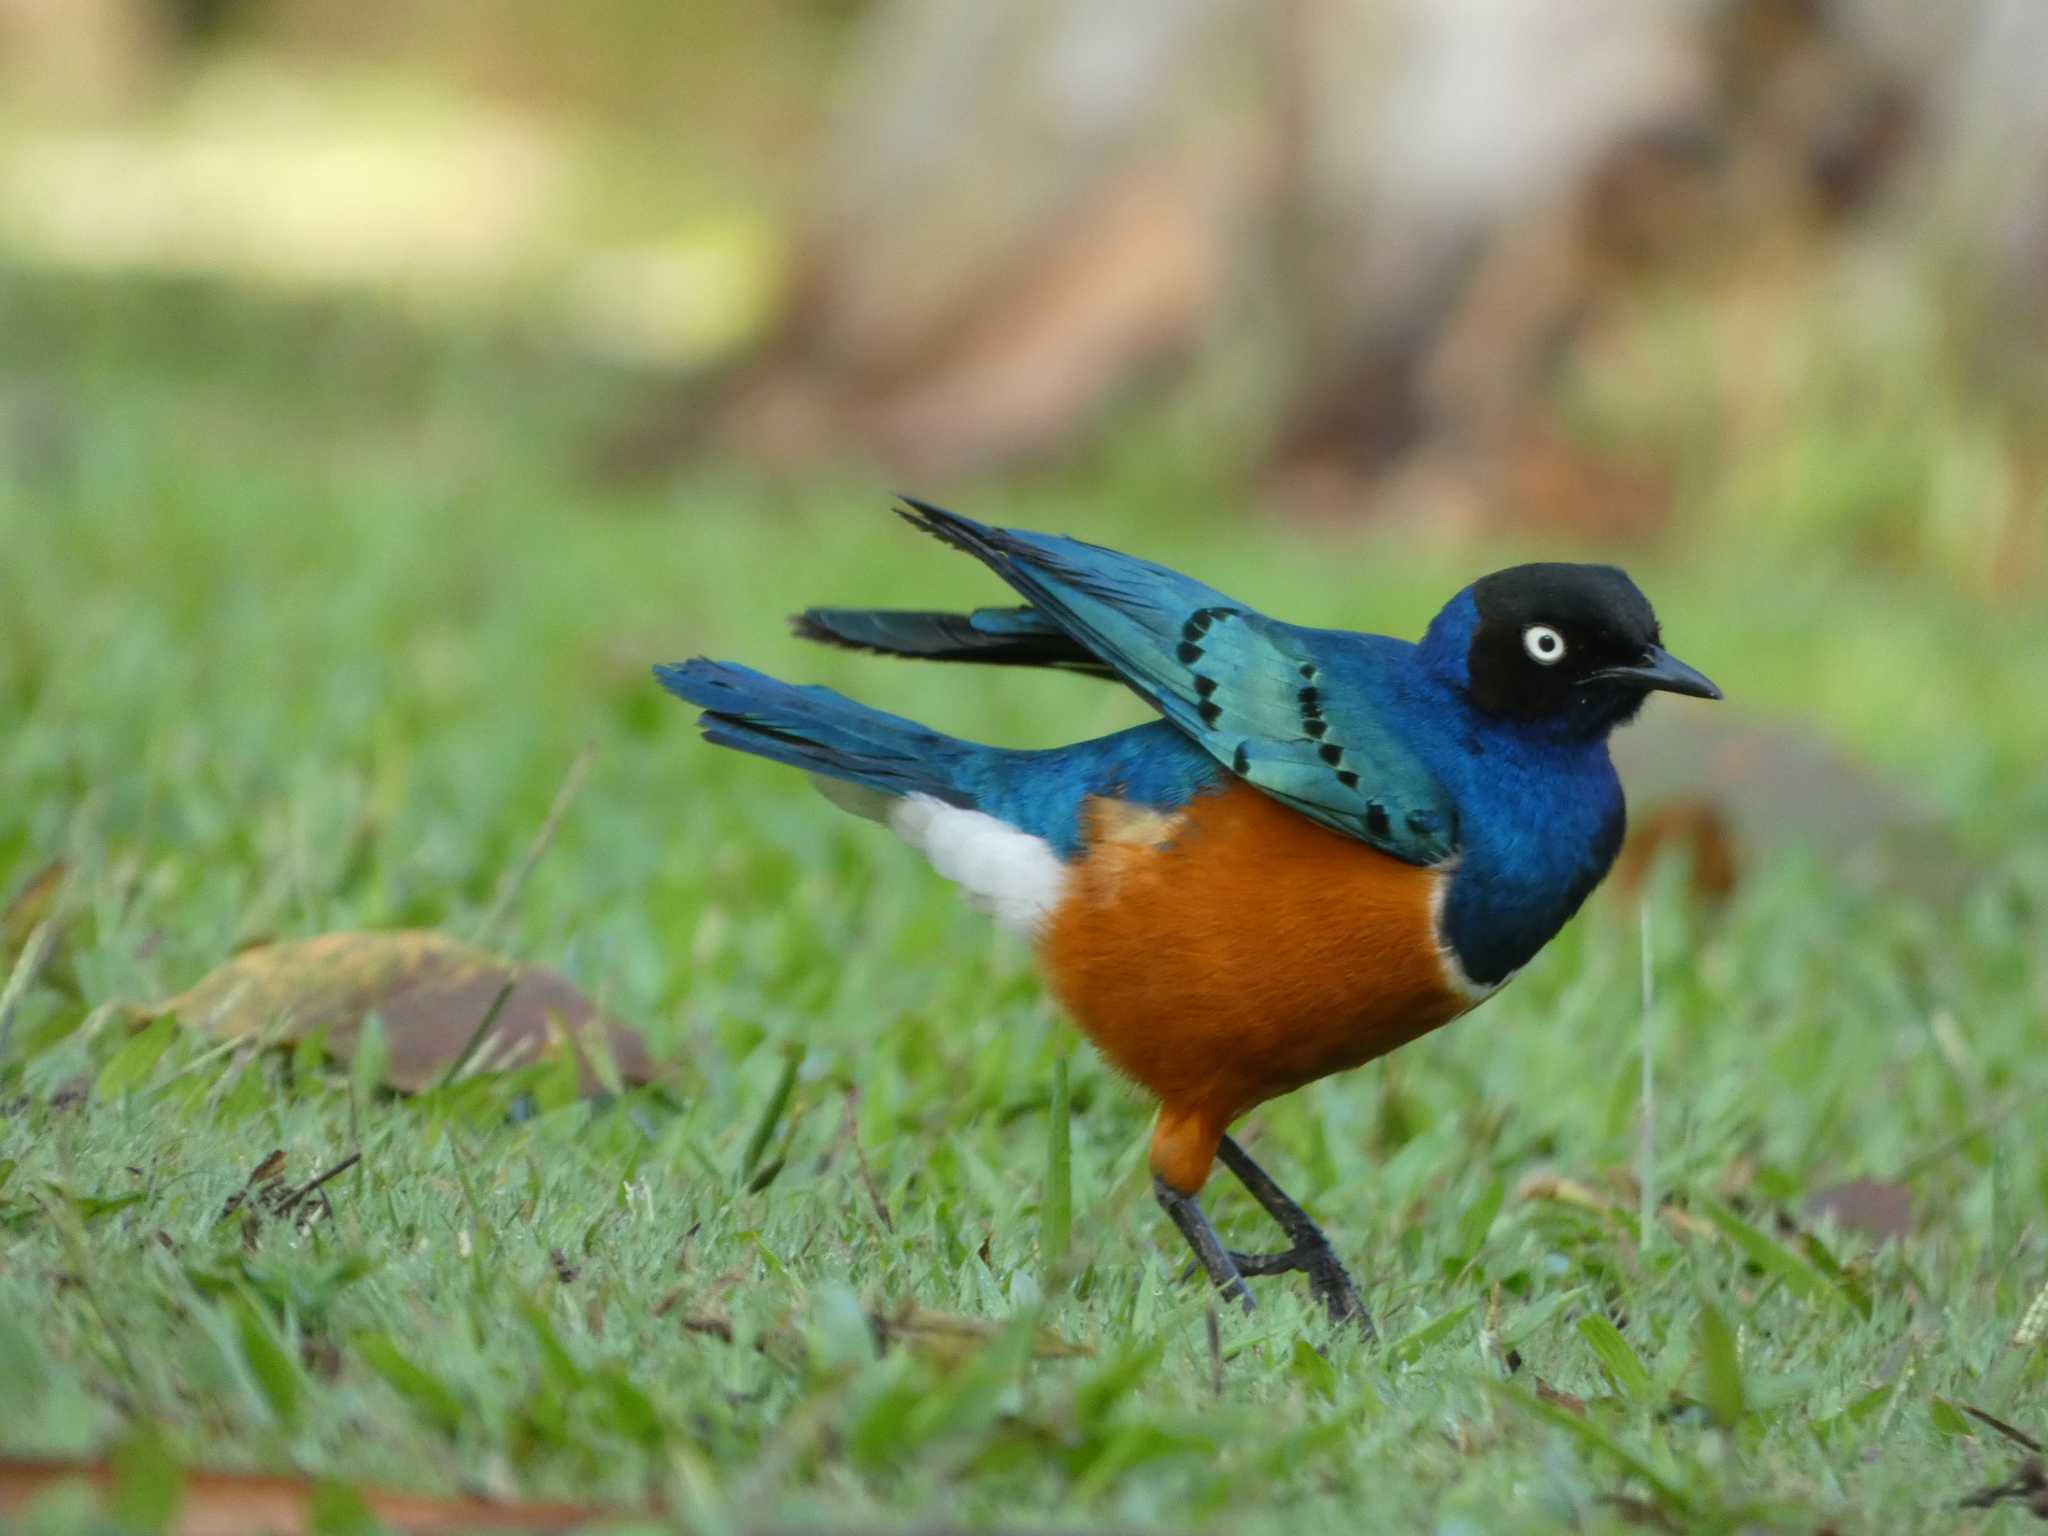 Photo of Superb Starling at シンガポール by このはずく